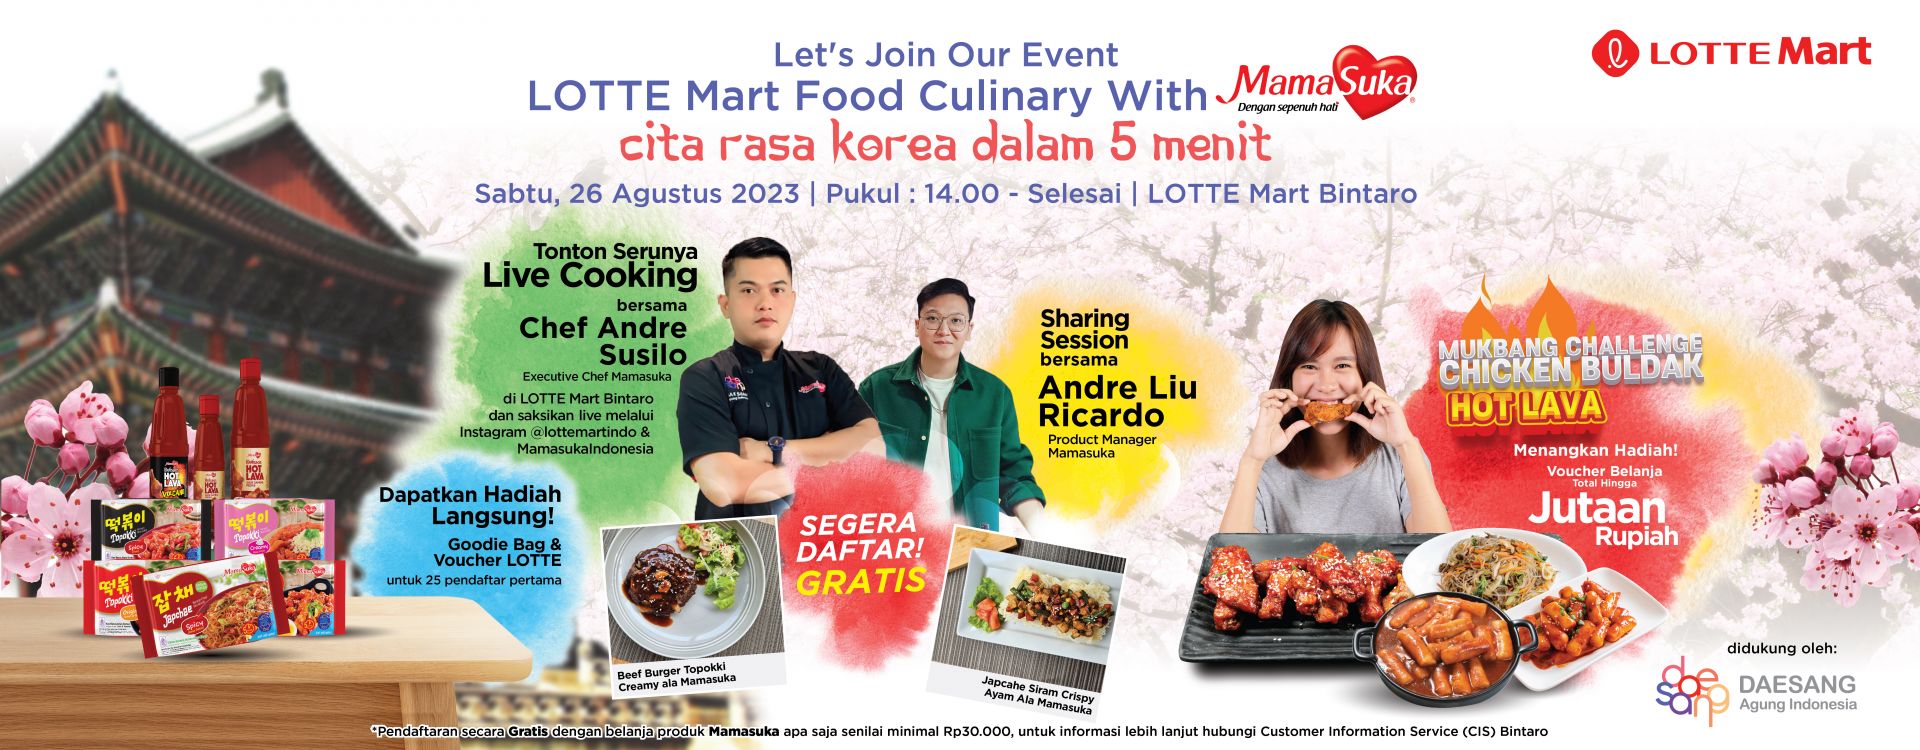 https://lottemart.co.id/Let's Join Our Event LOTTE Mart Food Culinary